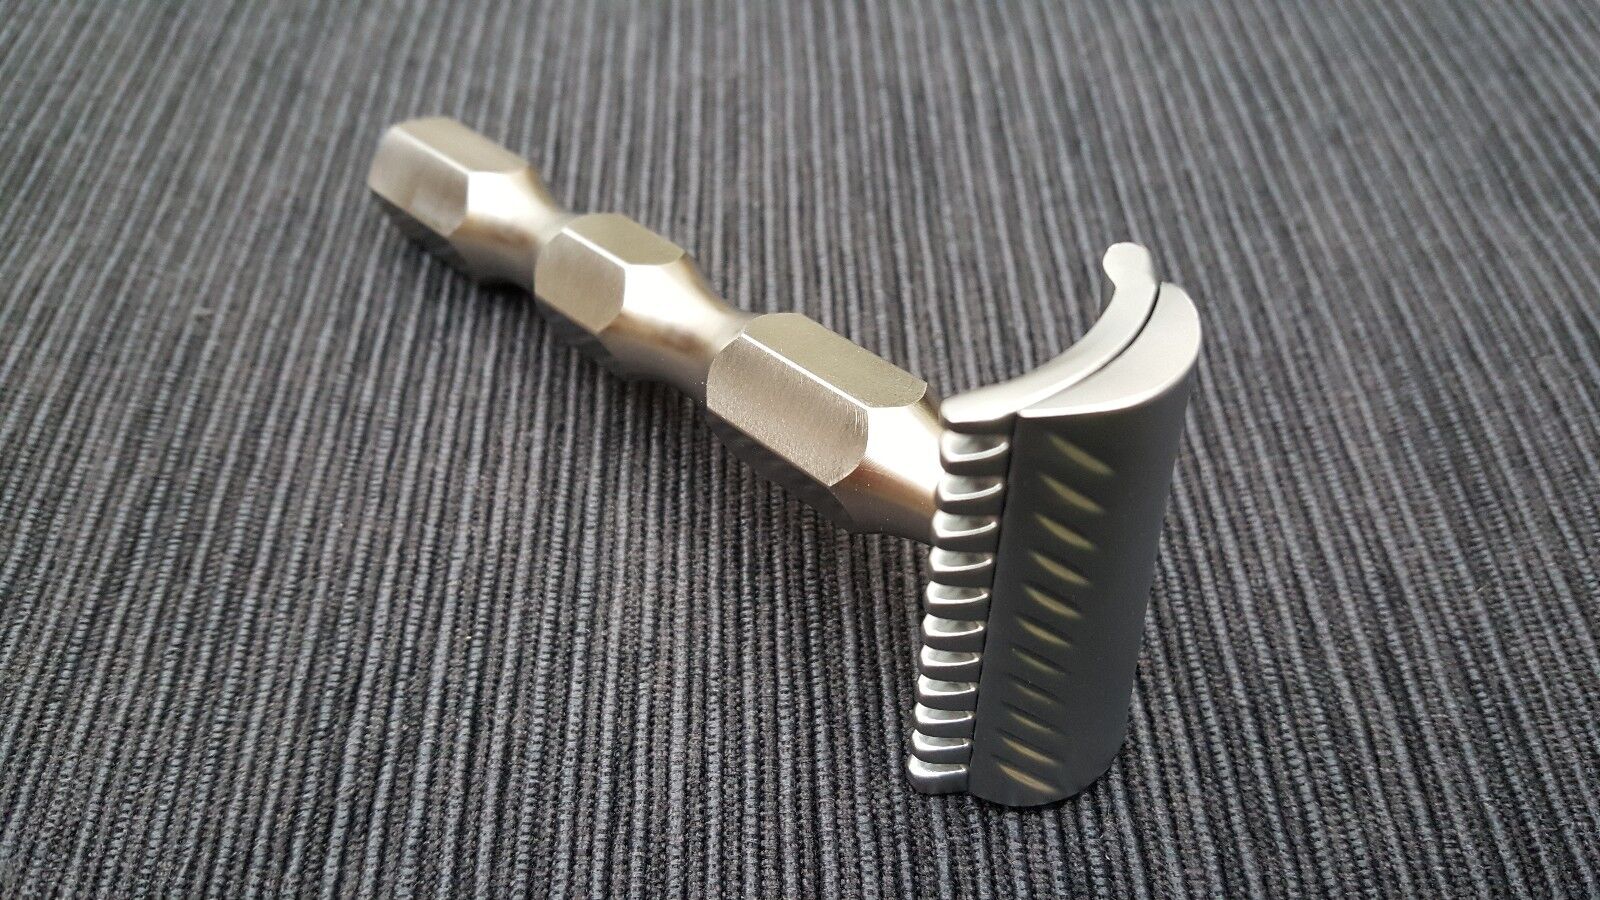 Windrose Safety razor Handles 9 designs to choose from. Made from 303 Stainless